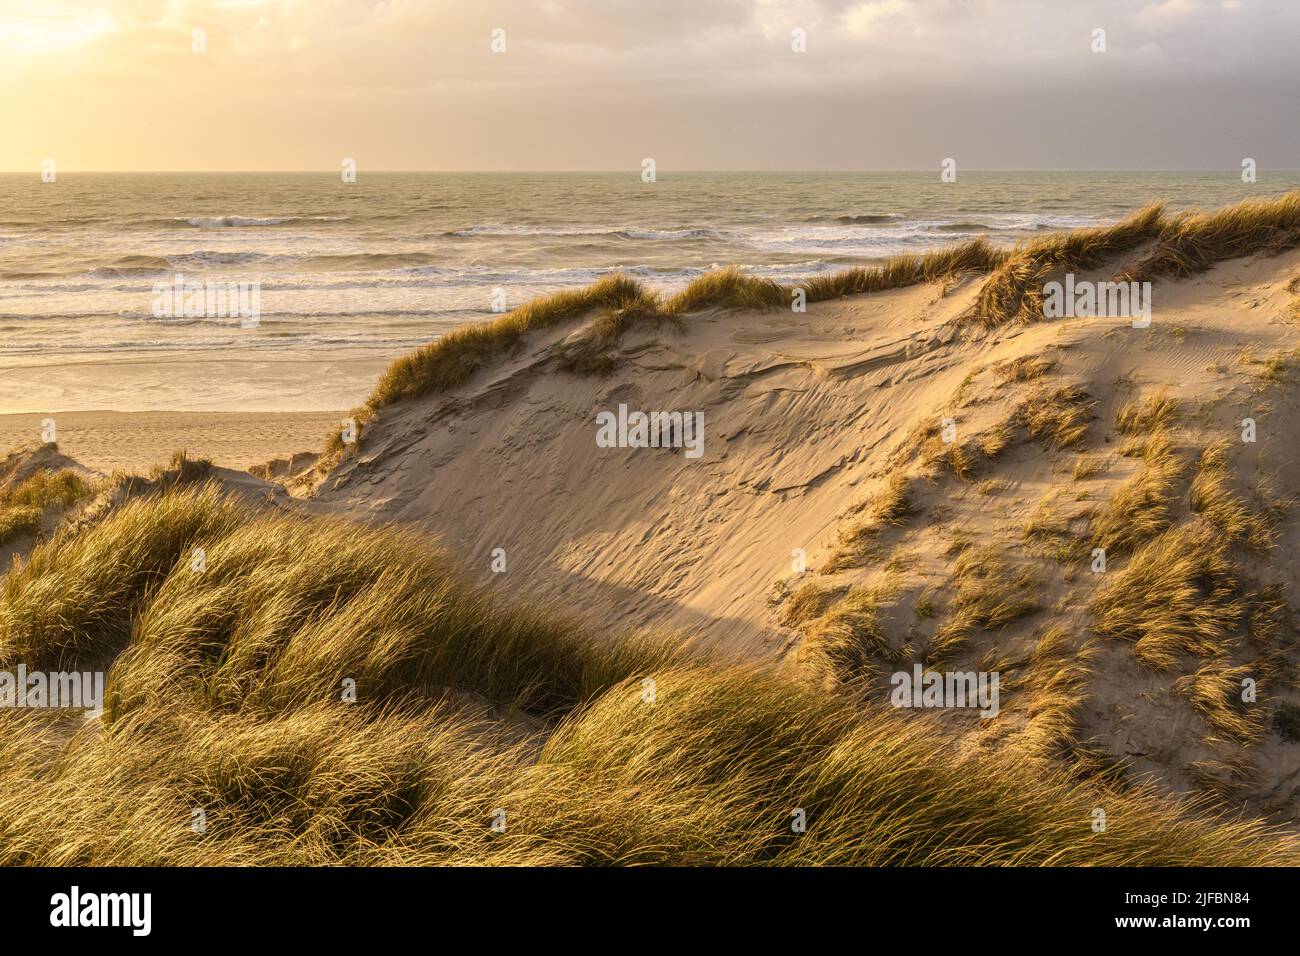 France, Somme, Baie de Somme, Saint-Valery-sur-Somme, The dunes of Marquenterre between Fort-Mahon and the Baie d'Authie at sunset Stock Photo